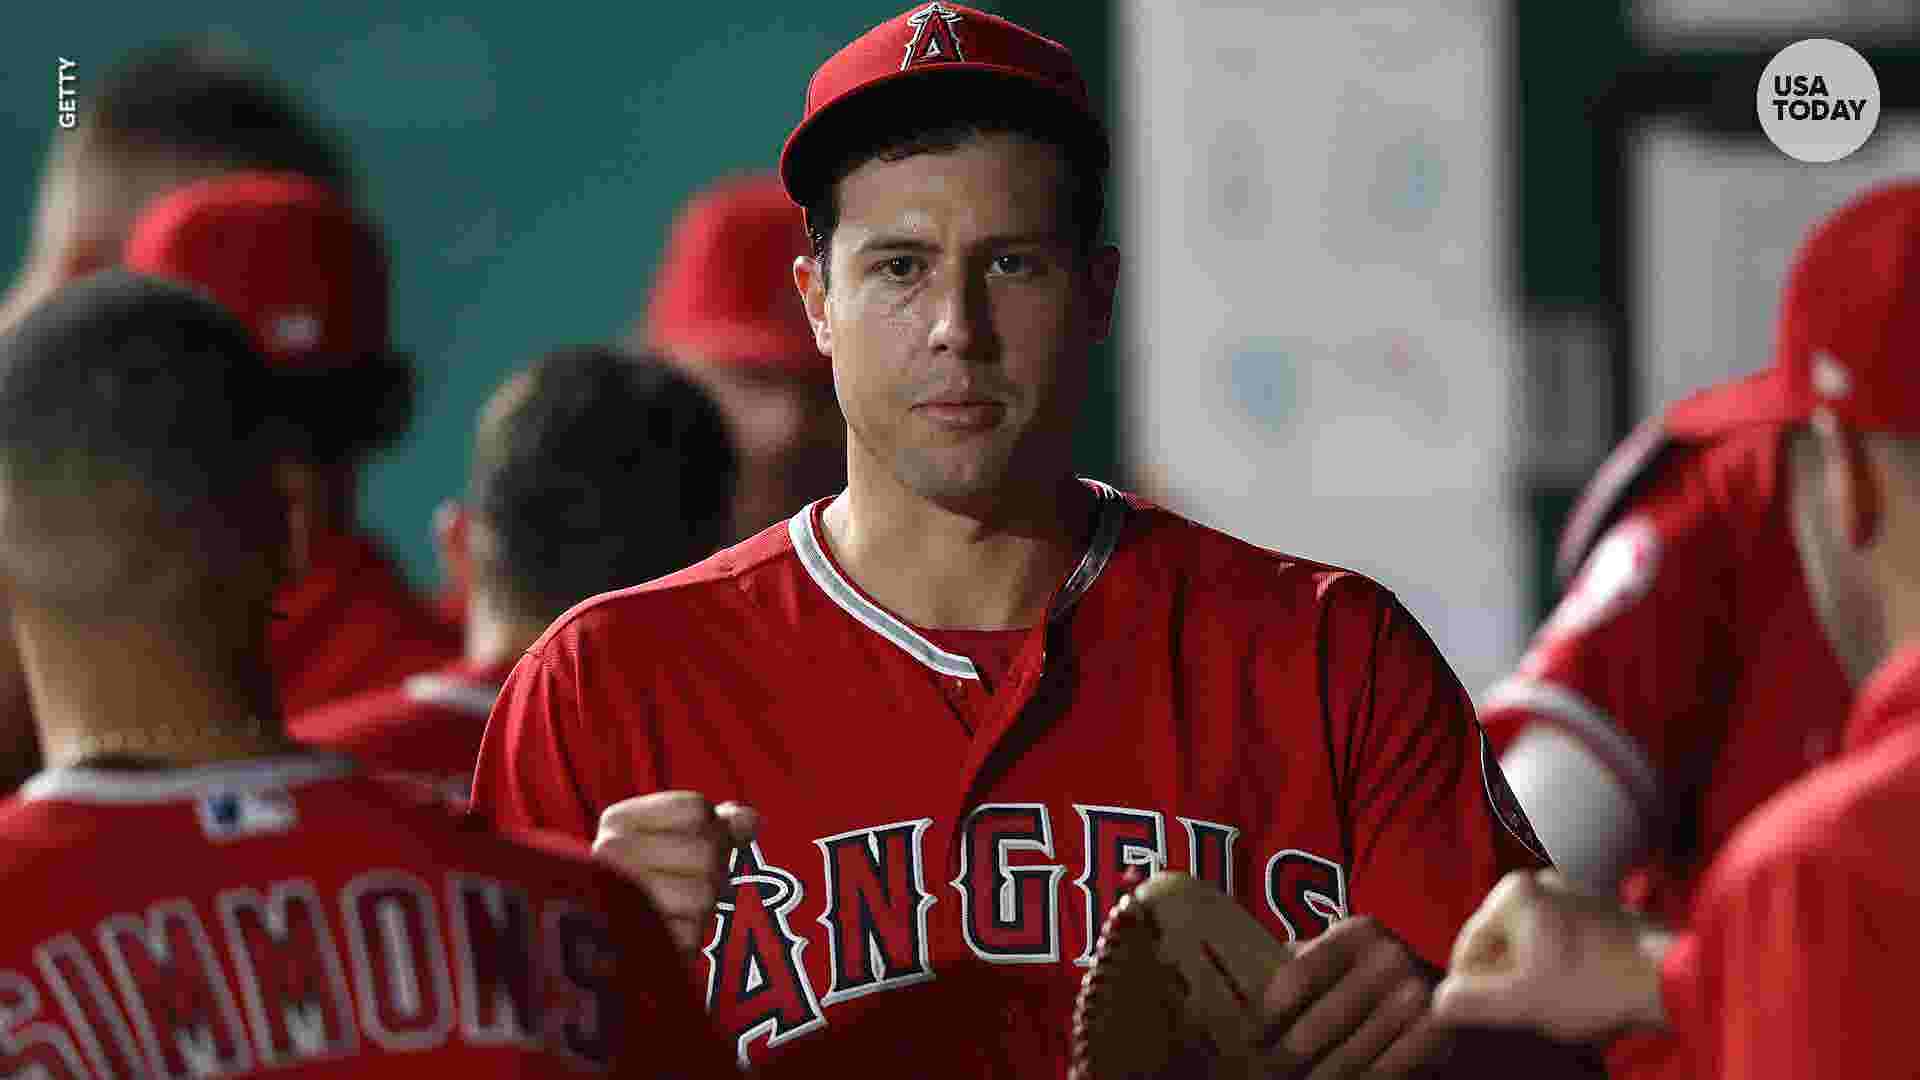 Tyler Skaggs death: Opioids, alcohol in system, toxicology shows